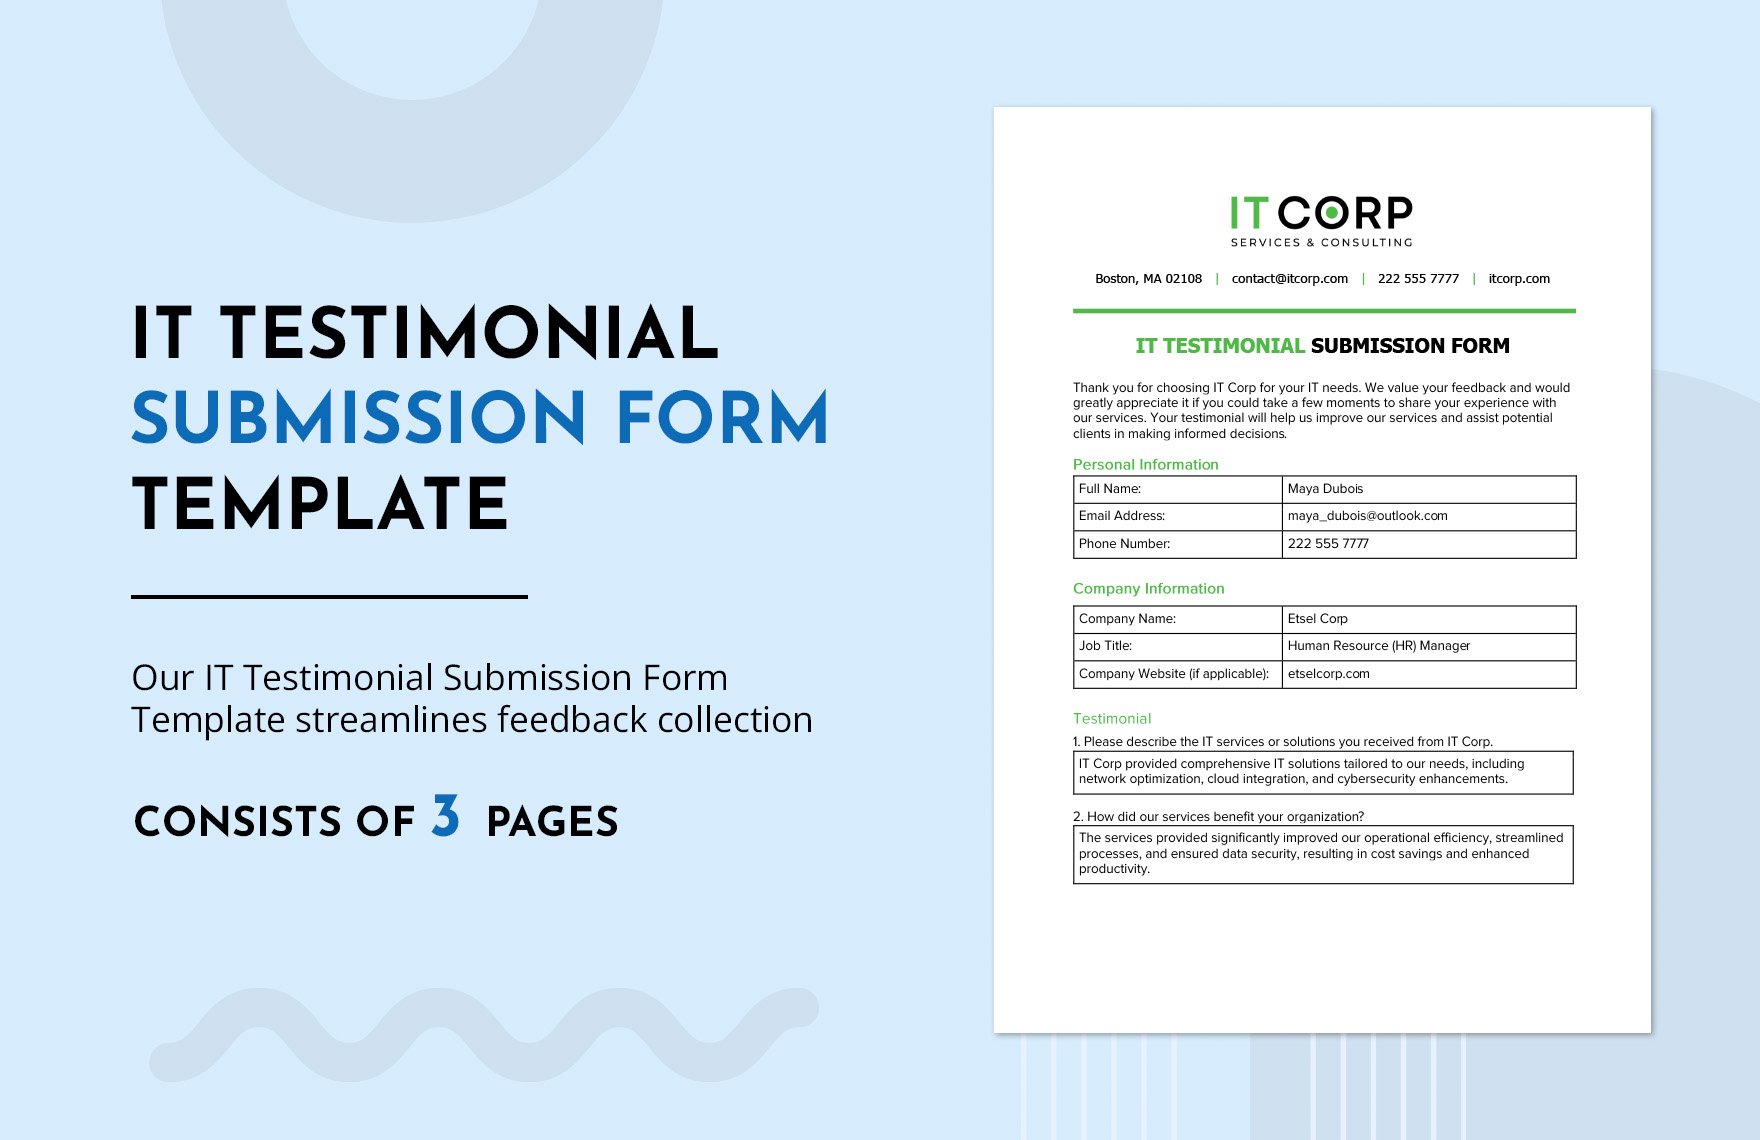 IT Testimonial Submission Form Template